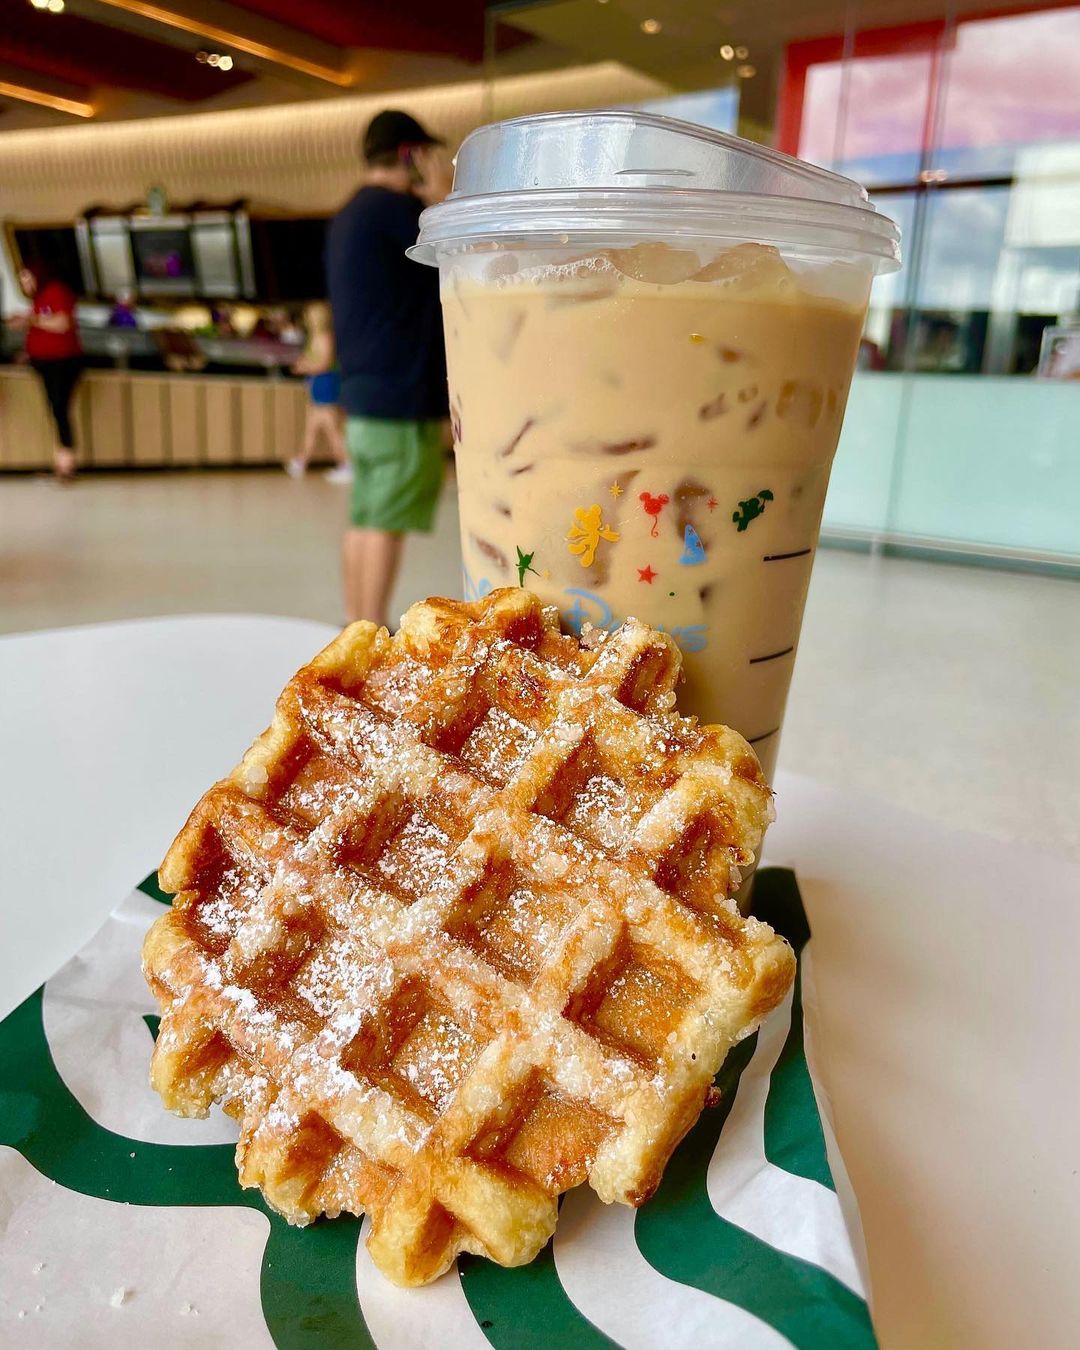 Coffee and Waffle at Connections Cafe - Starbucks from Epcot